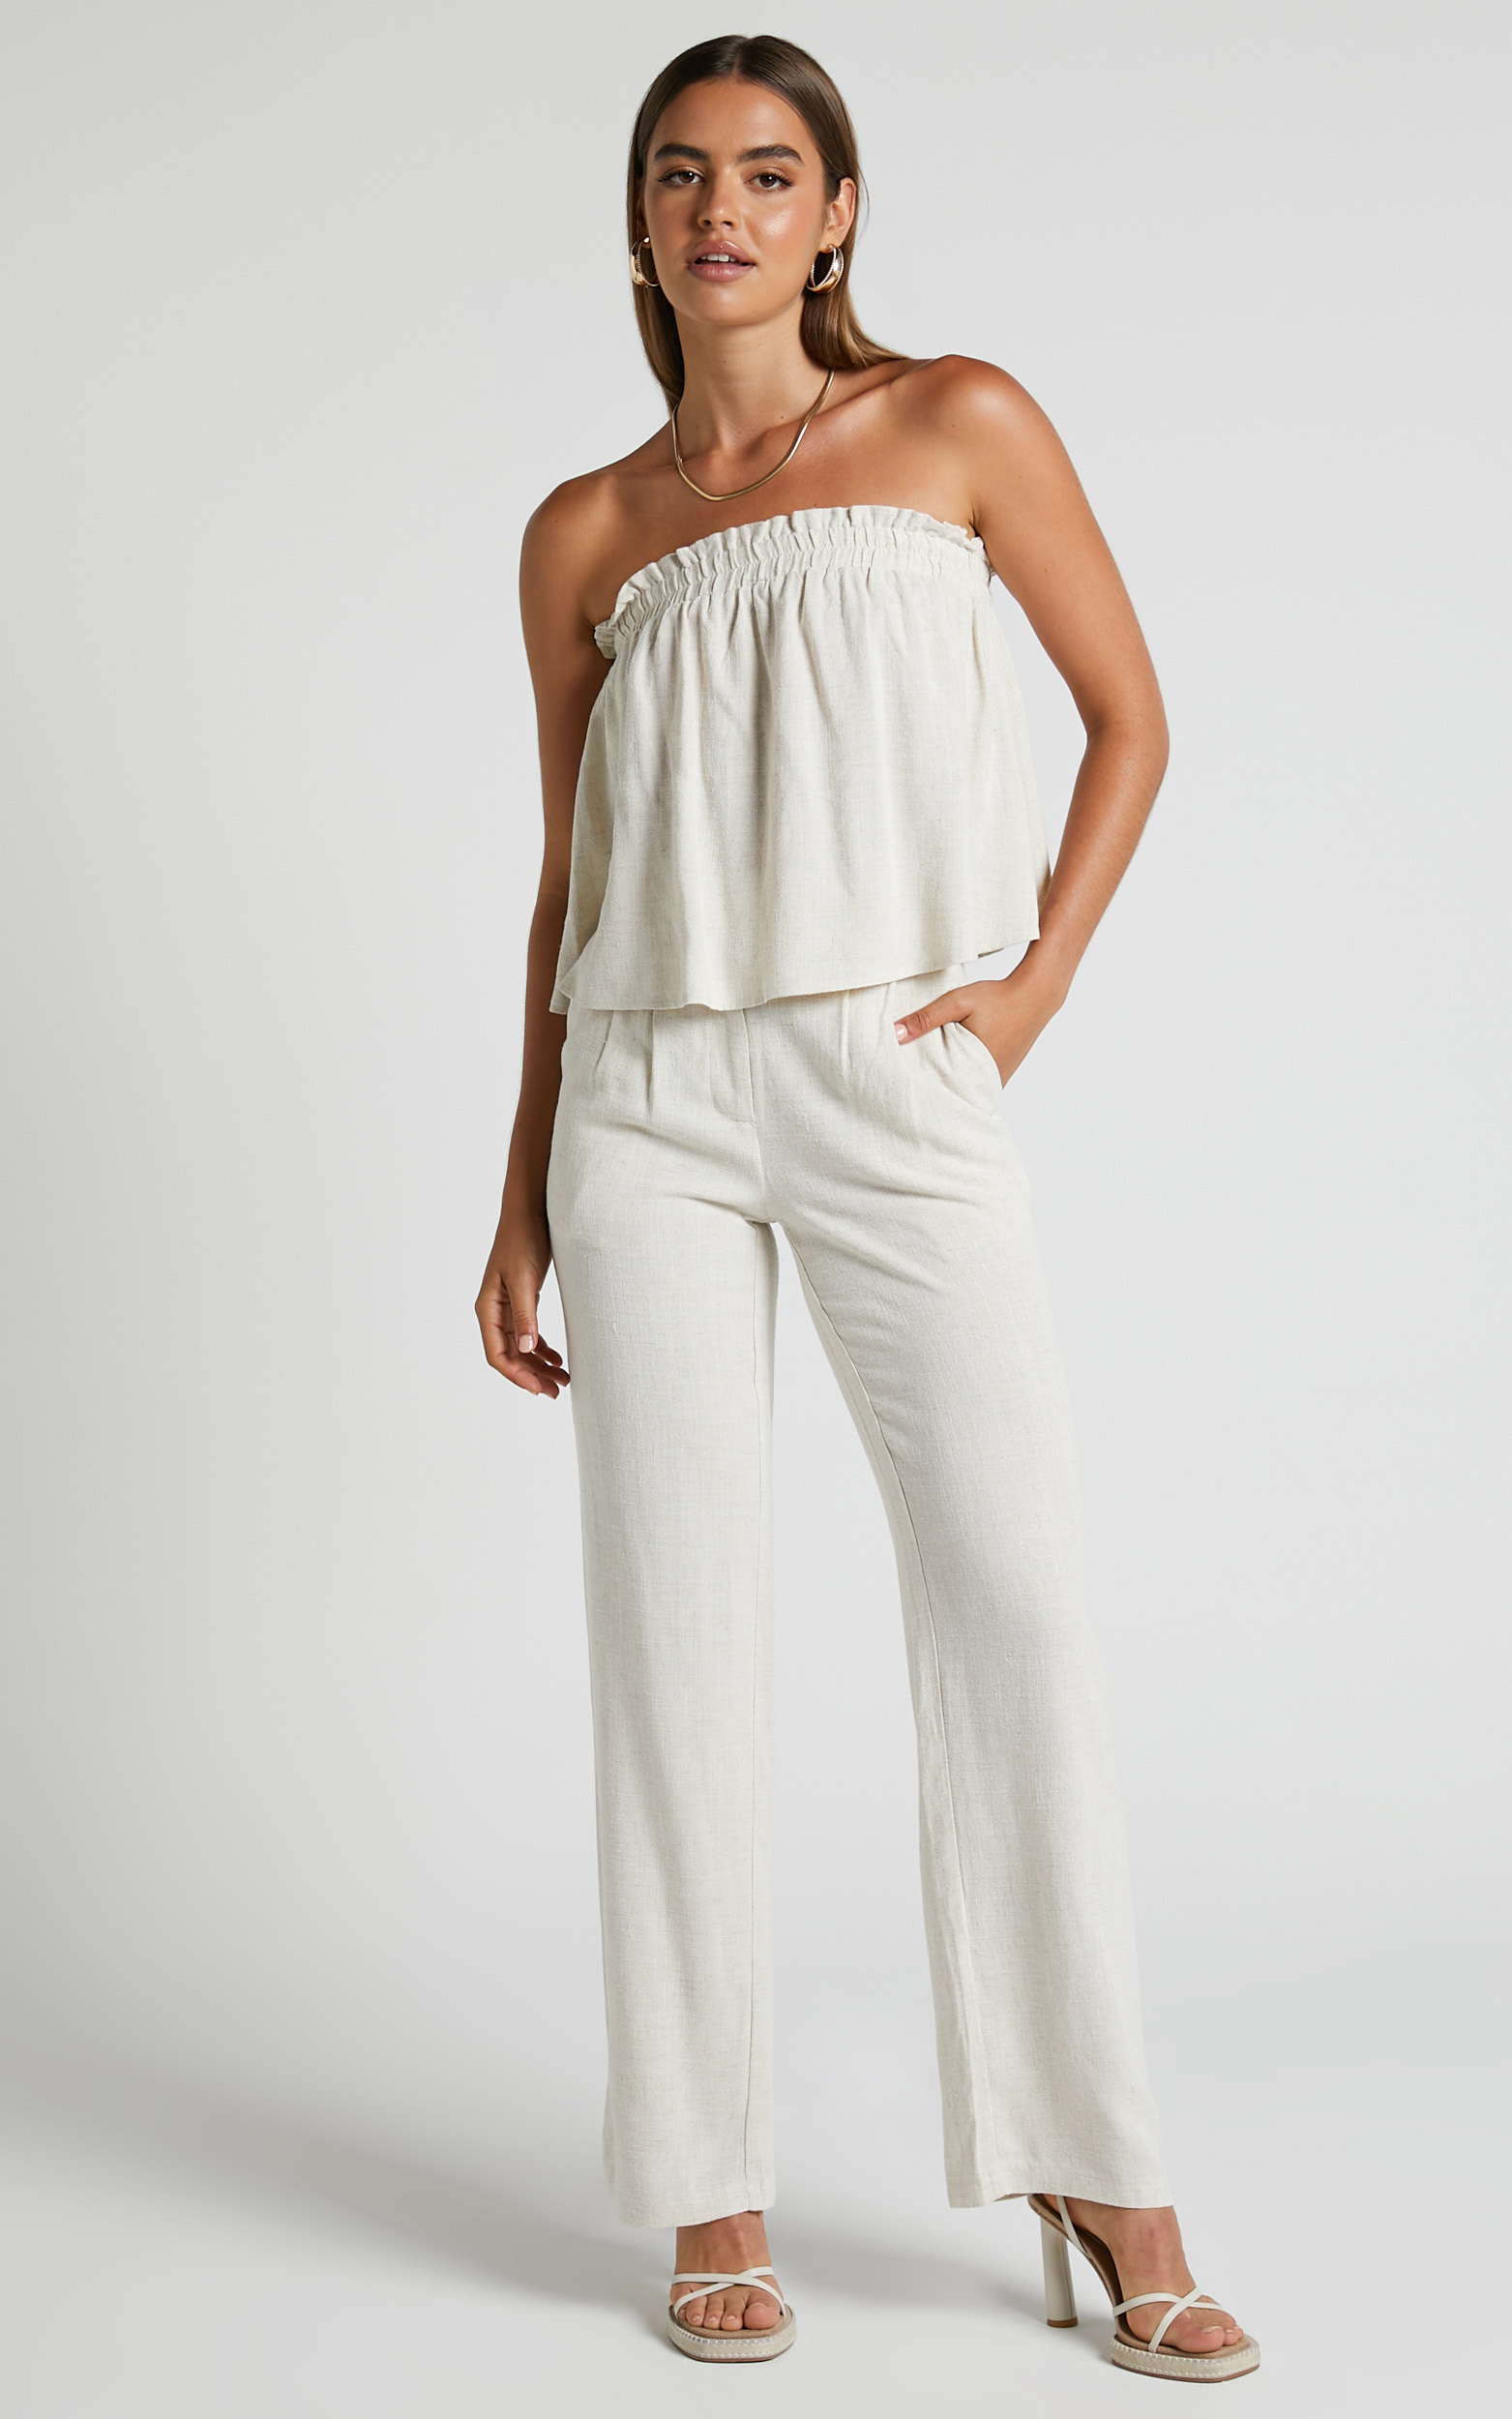 Emmy Two Piece Set - Strapless Top and Relaxed Pants in Oat - 04, NEU1, hi-res image number null